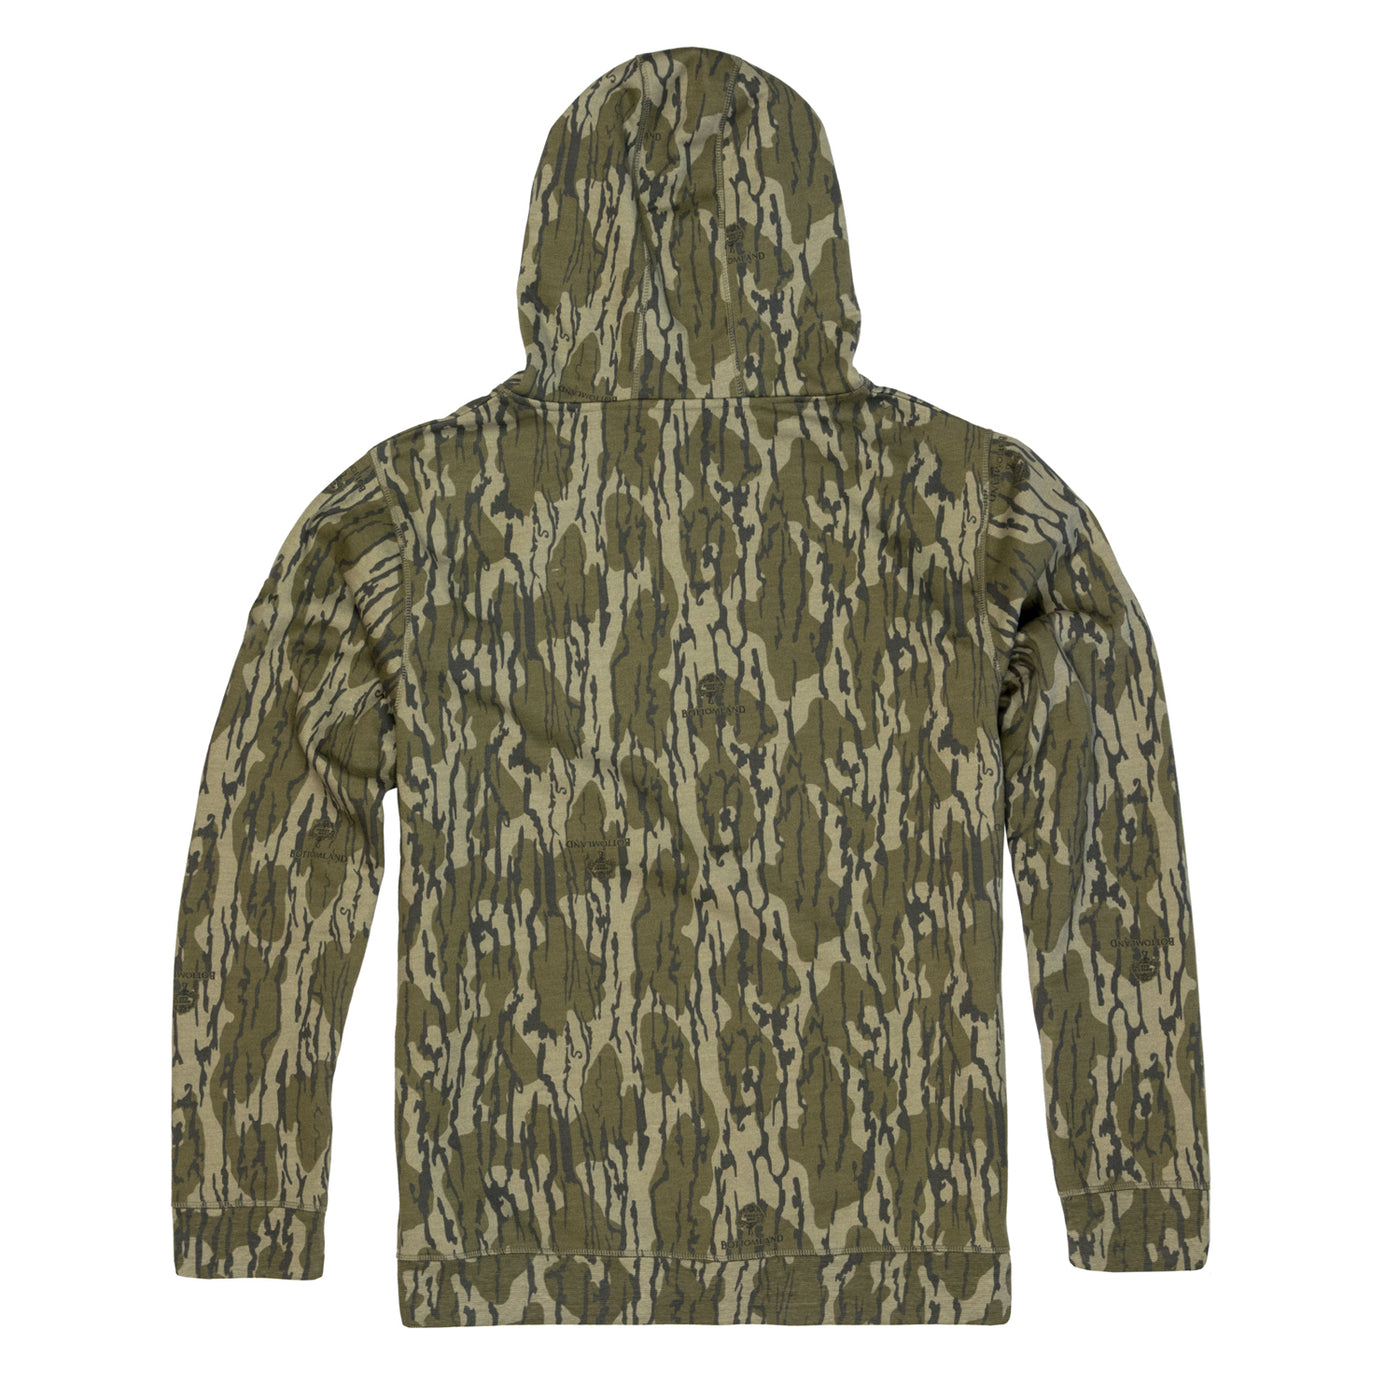 Cotton Mill Vintage Hoodie – The Mossy Oak Store